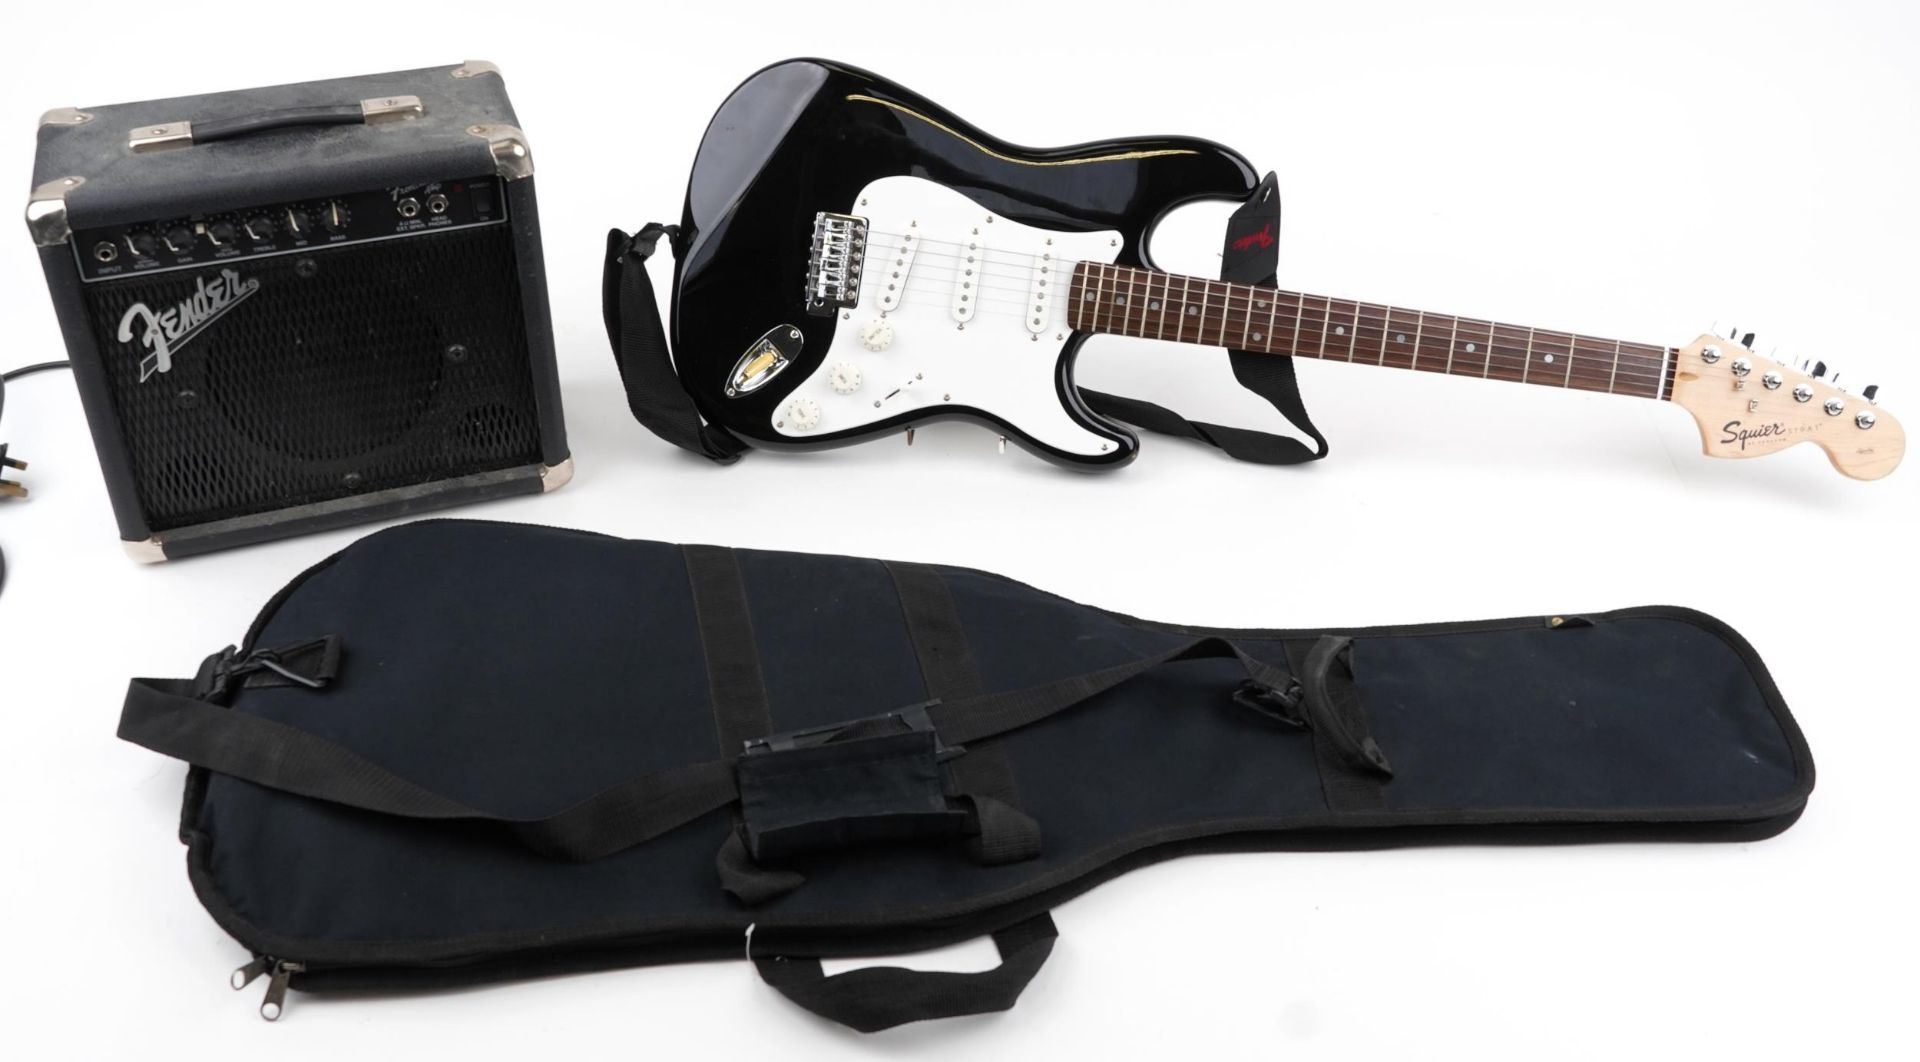 Squire Strat by Fender six string electric guitar with Fender Front Man amp and protective travel - Image 6 of 6